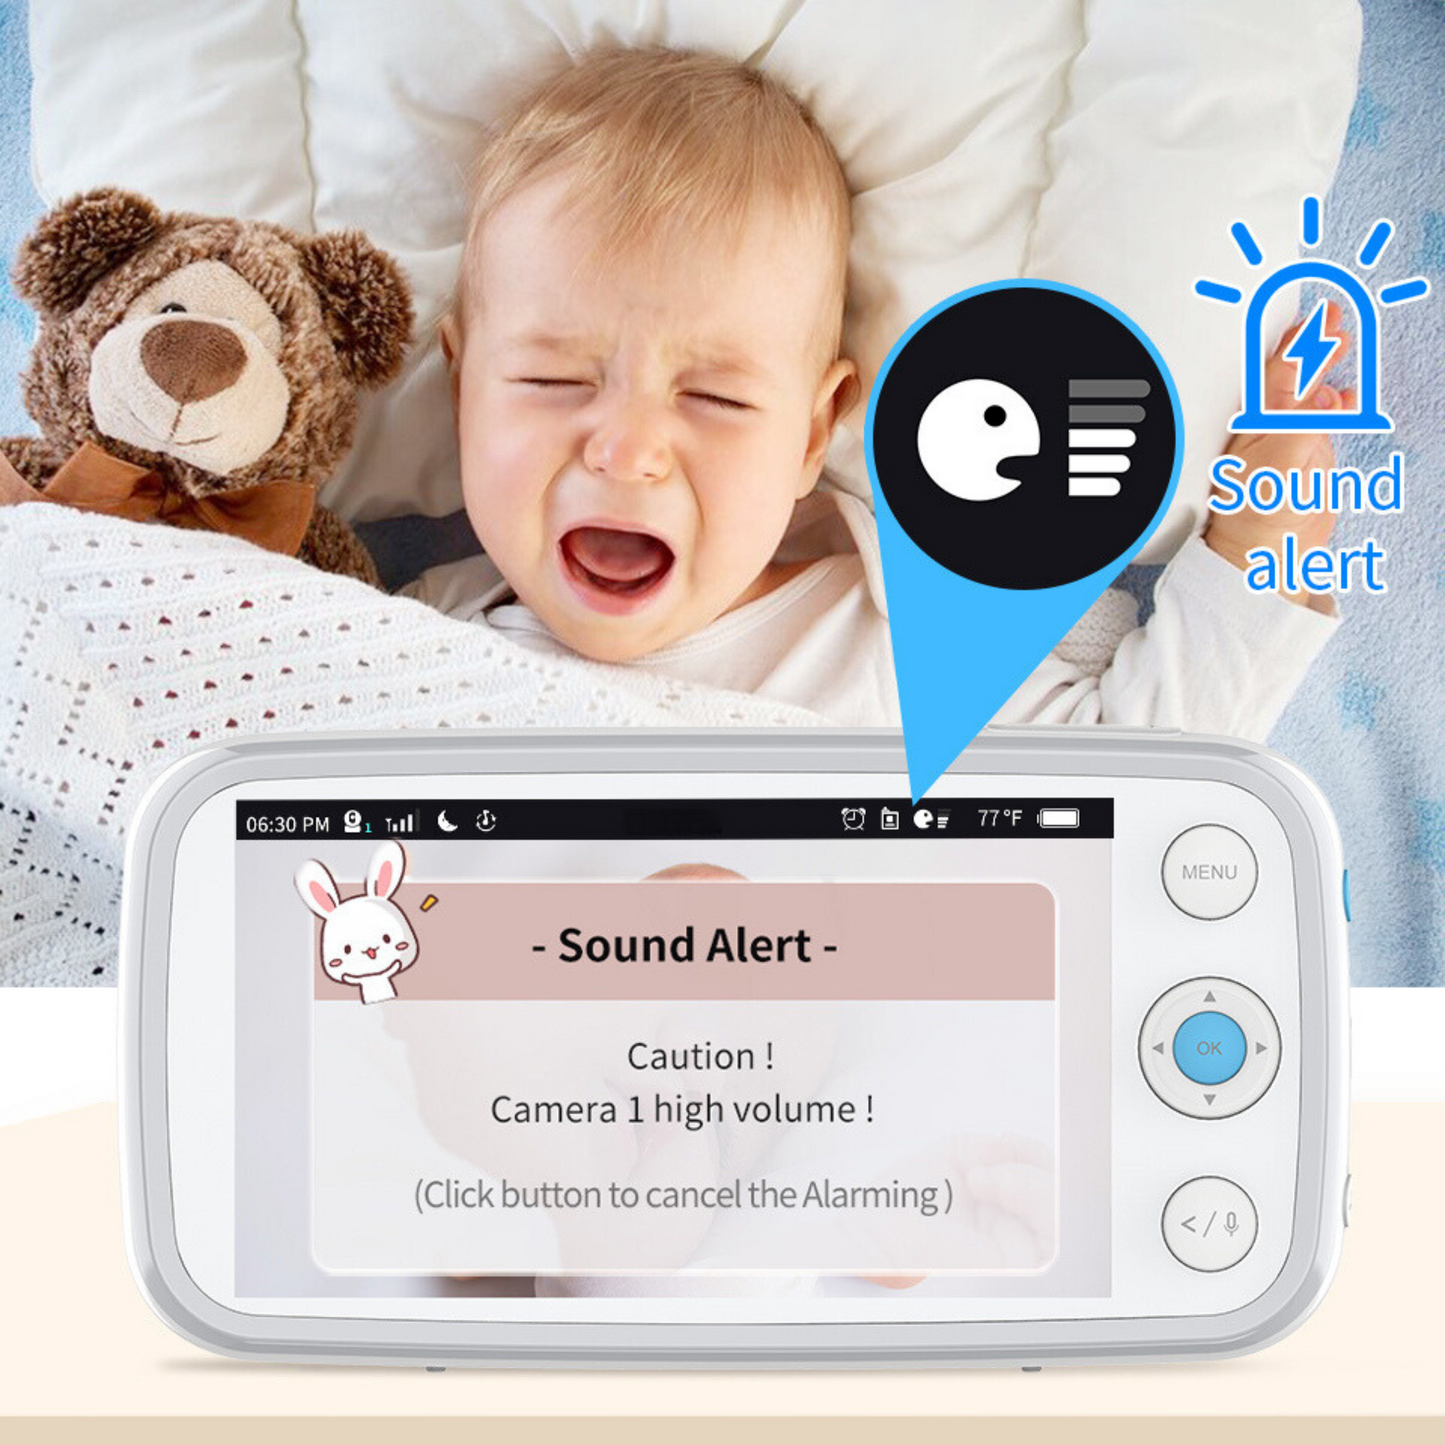 ClearView 360° 2K QHD Smart Baby Monitor